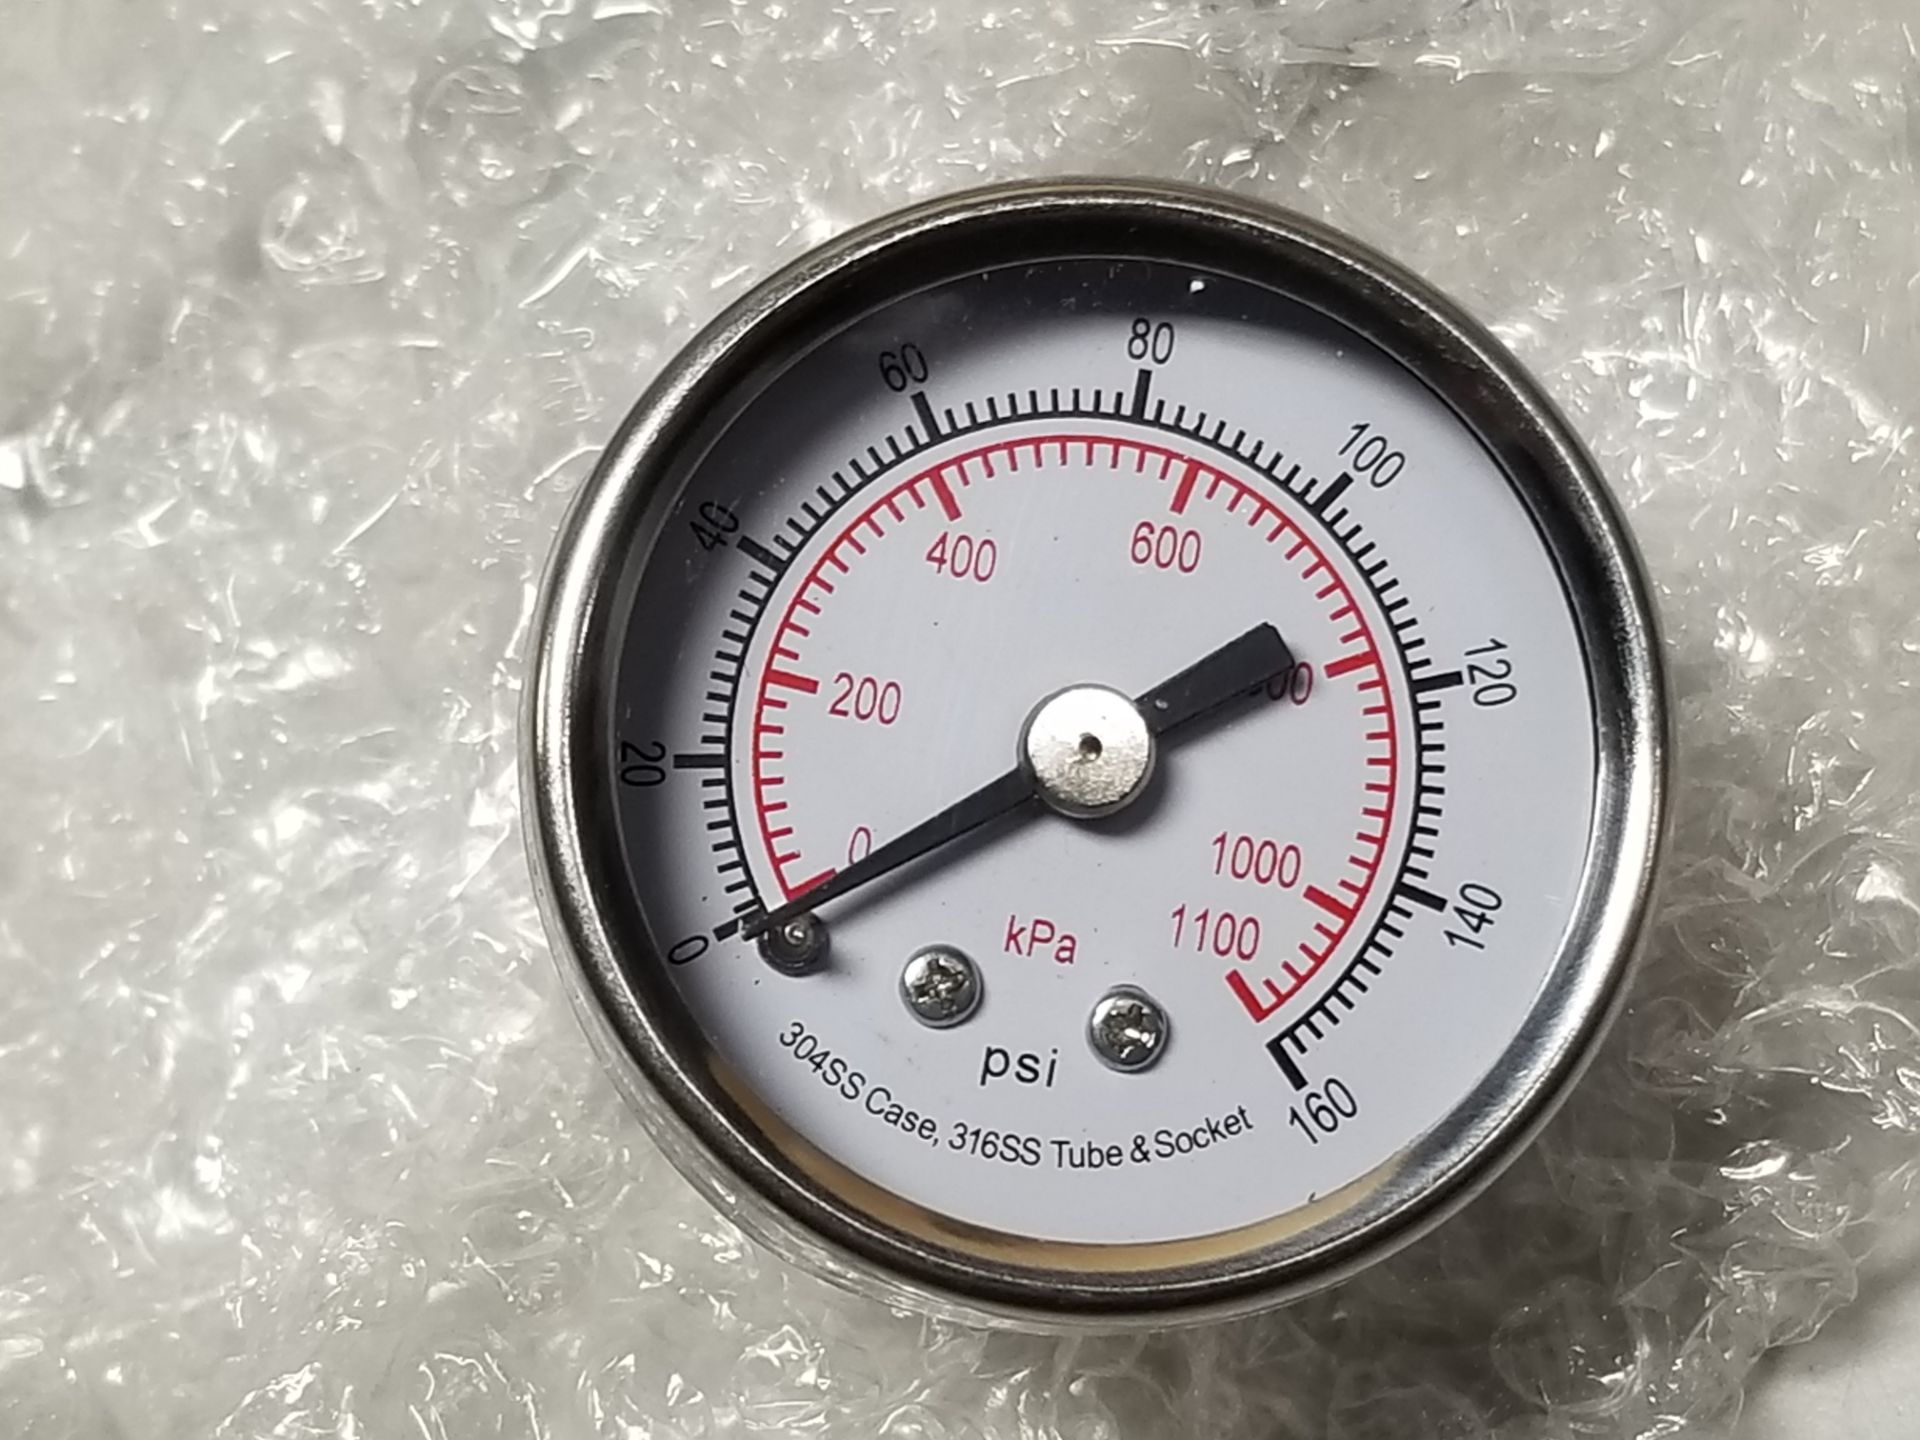 LOT OF 5 NEW 1 1/2" STAINLESS STEEL 160PSI PRESSURE GAUGE - Image 4 of 5